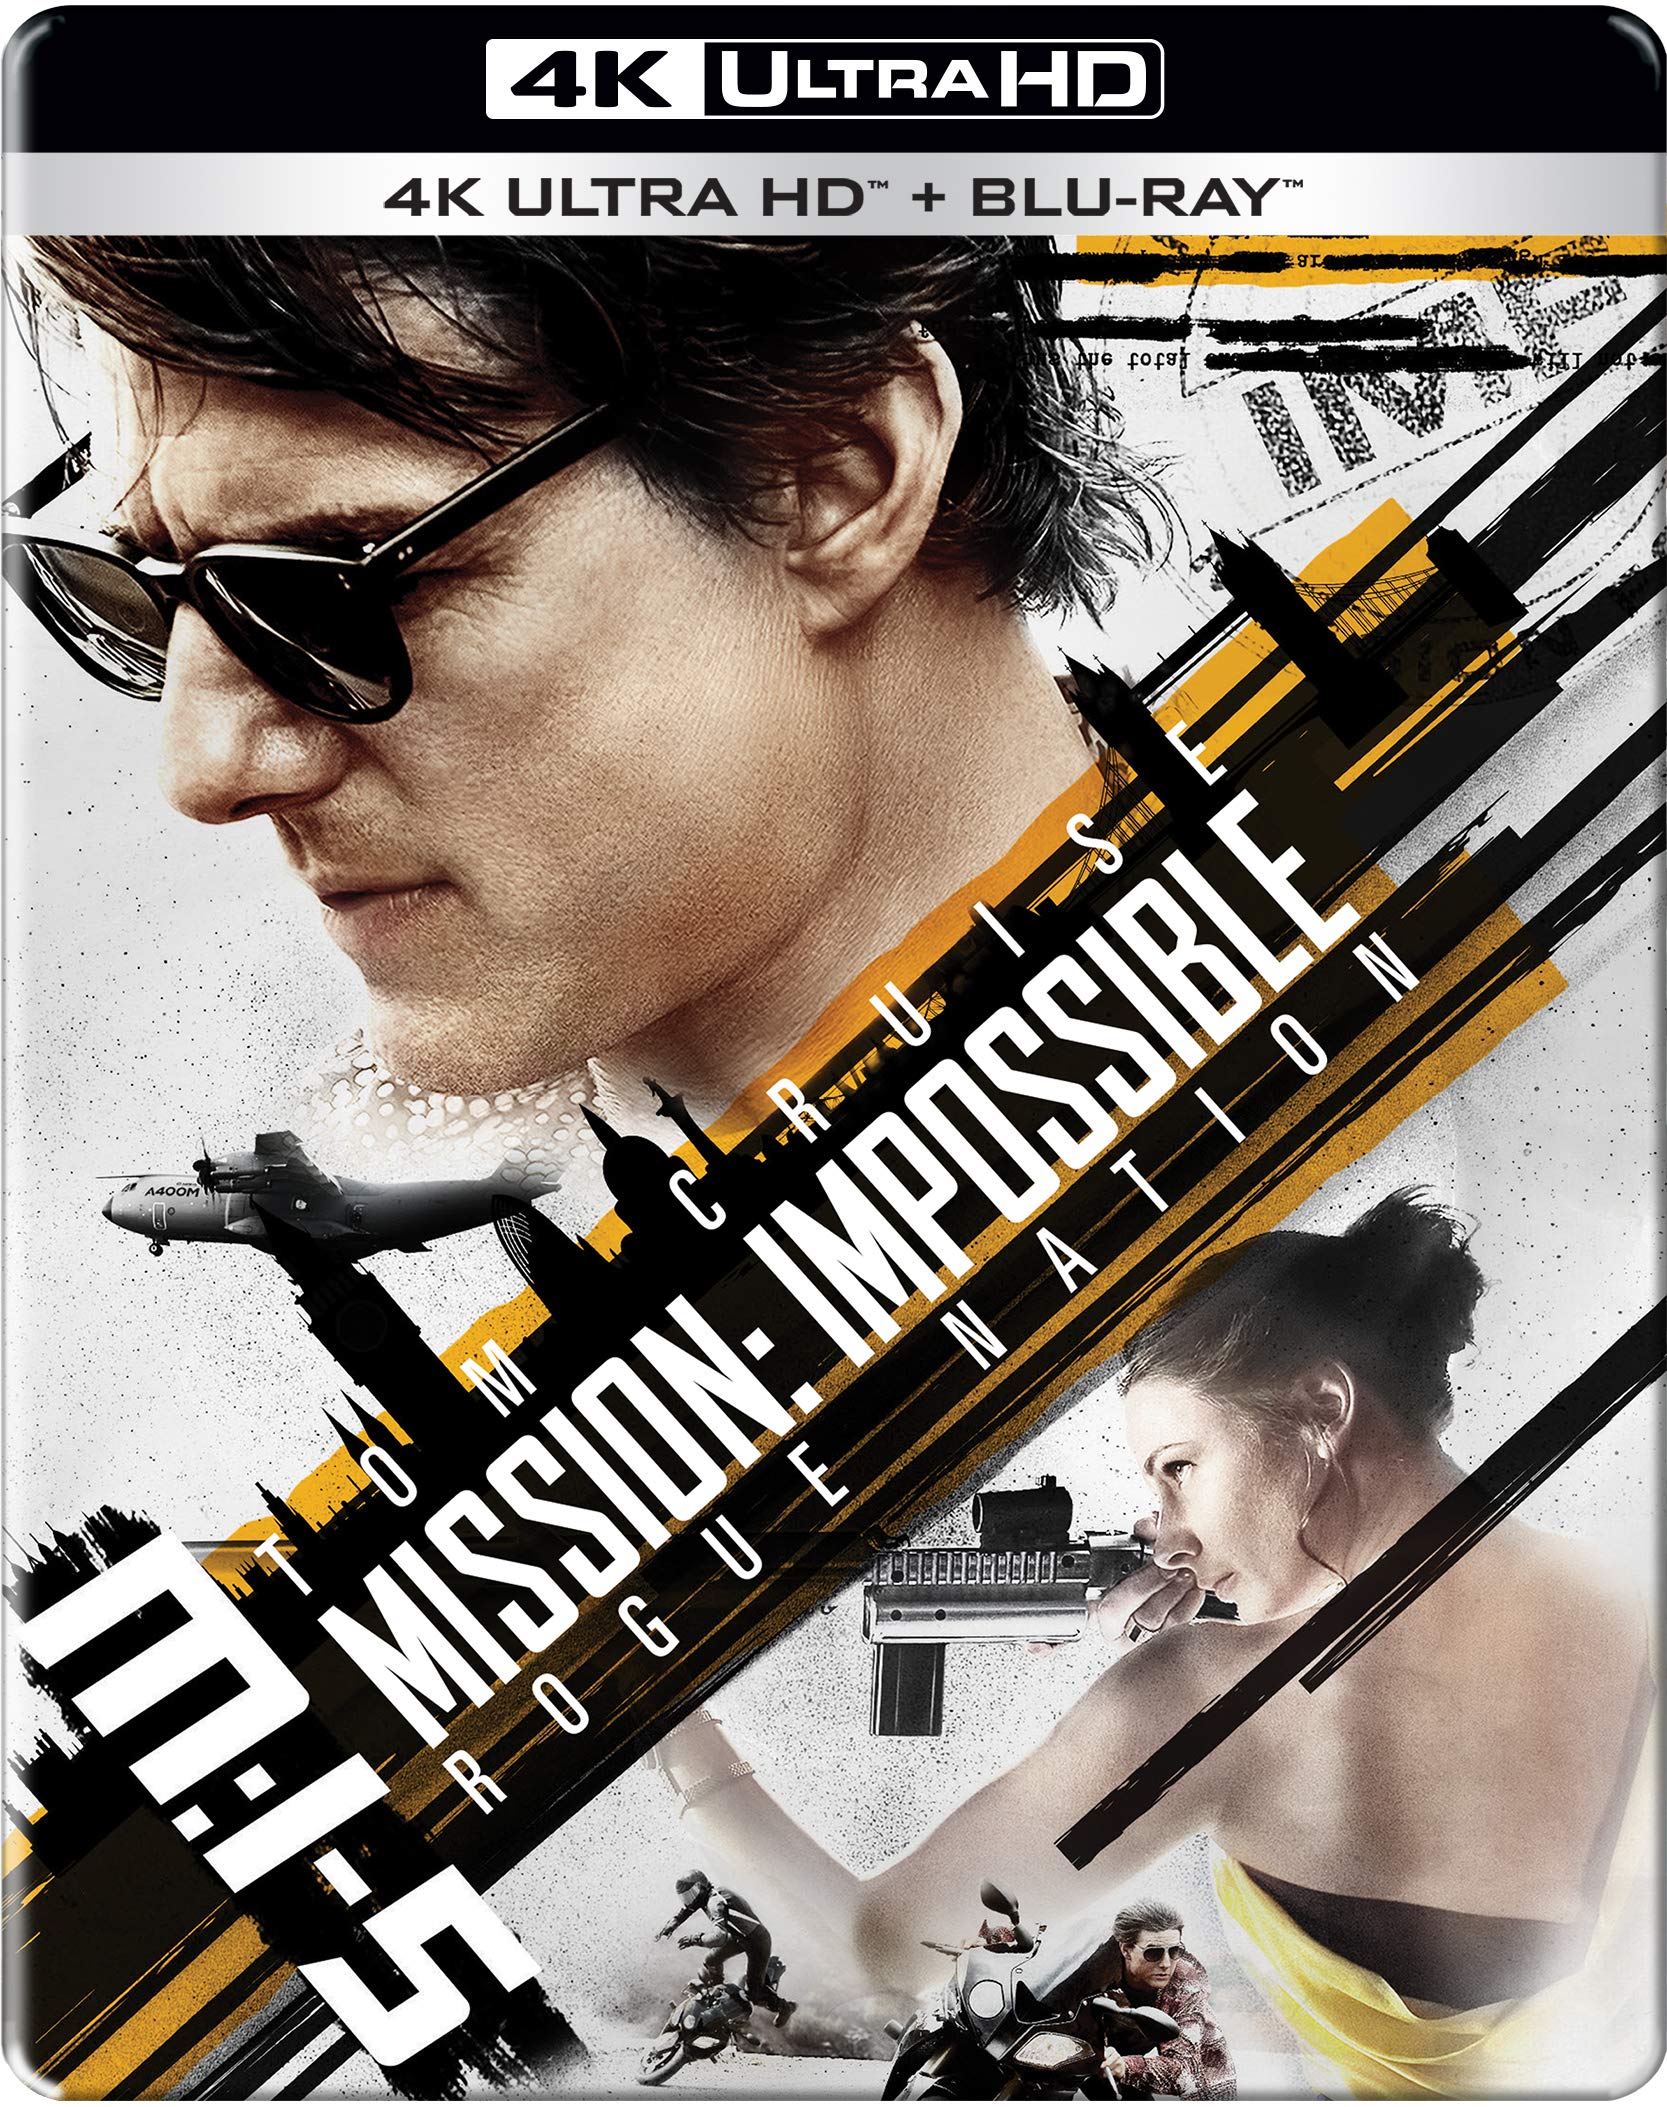 mission-impossible-5-rogue-nation-steelbook-4k-uhd-hd-2-disc